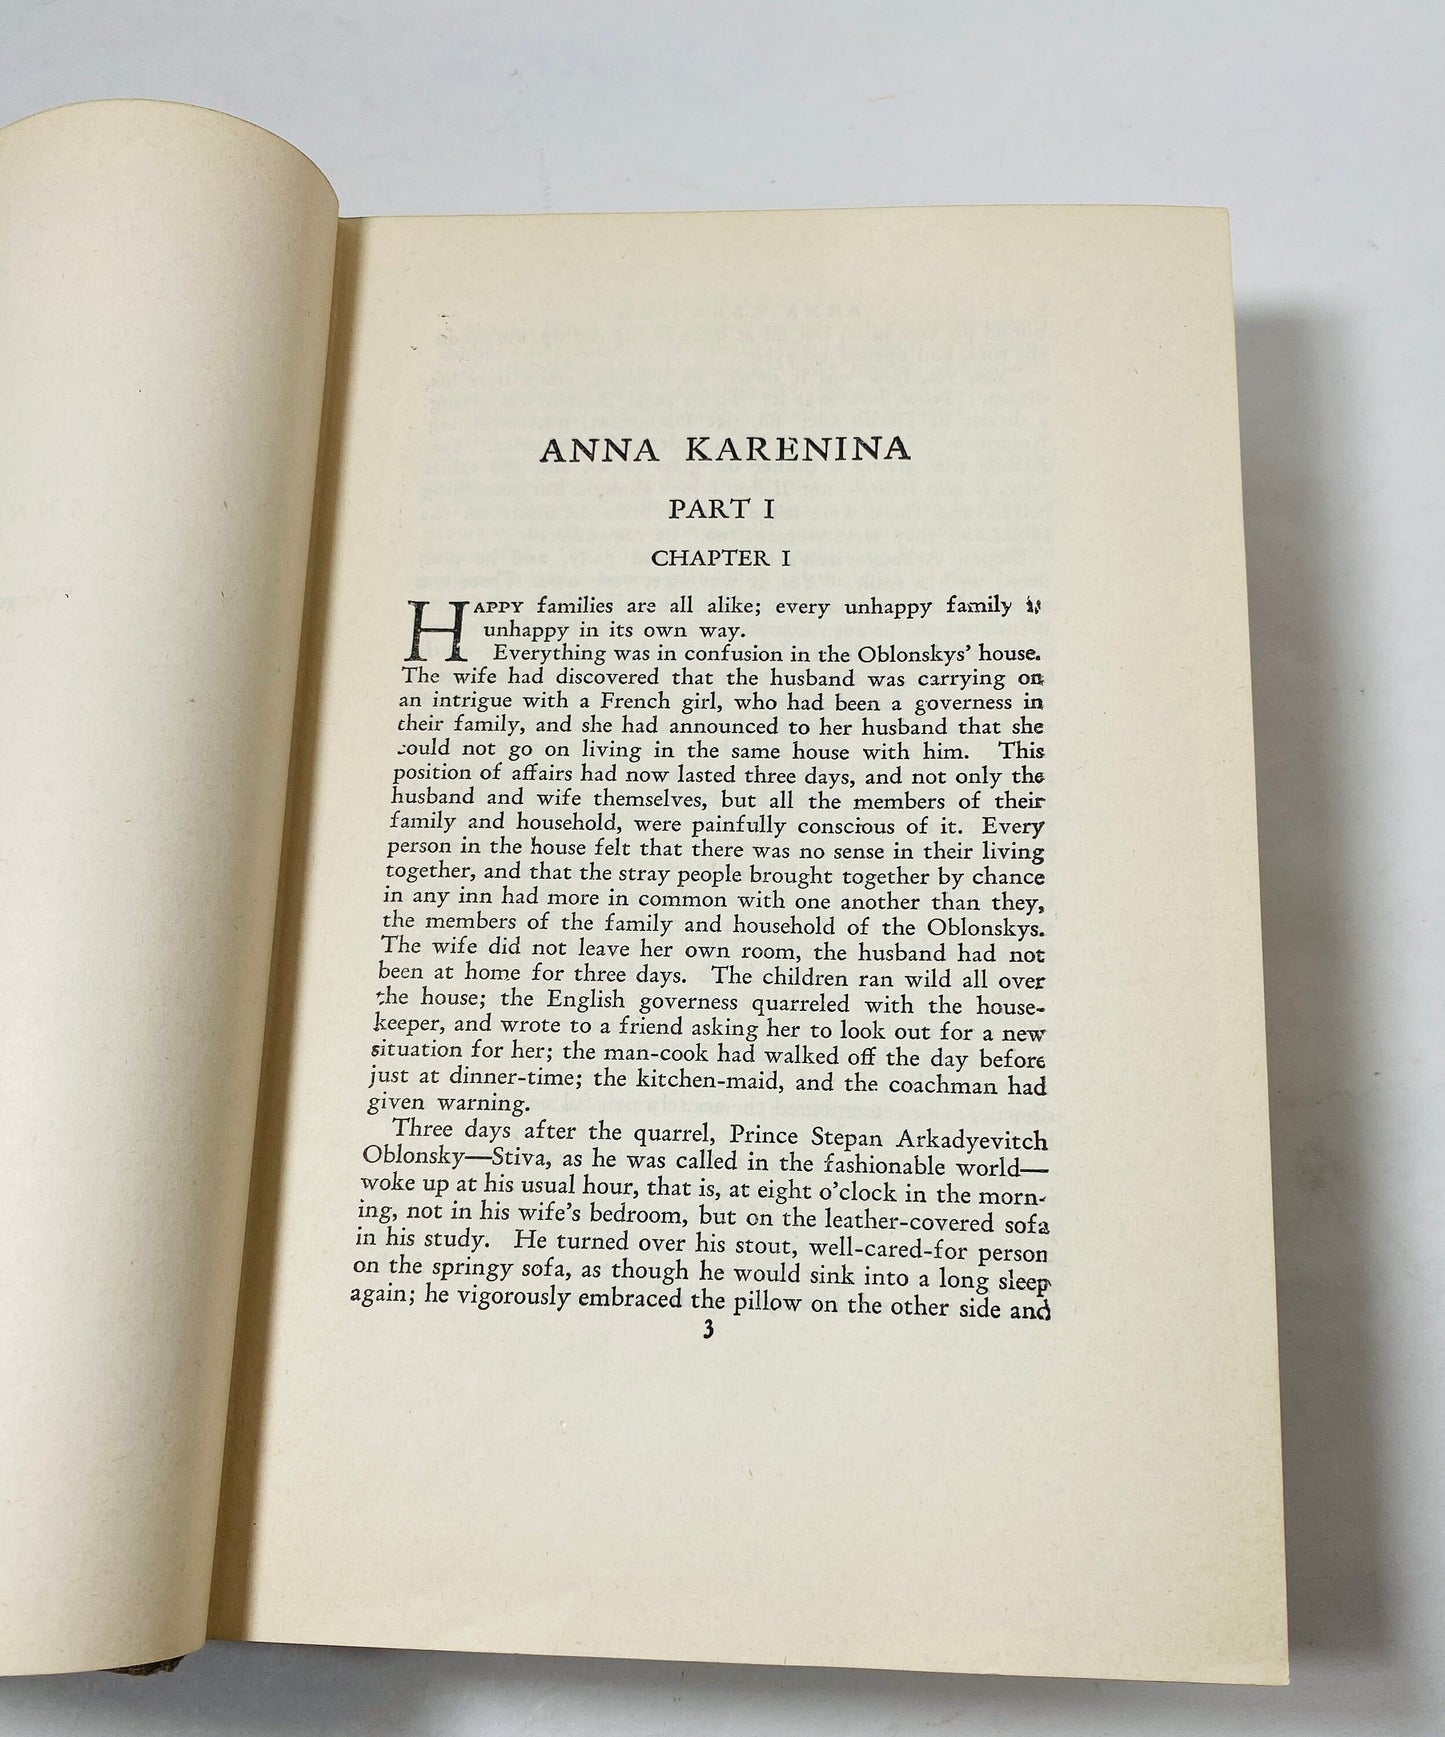 Anna Karenina vintage Modern Library book by Tolstoy circa 1931 Classic Russian aristocrat Literature romance love story of an affair